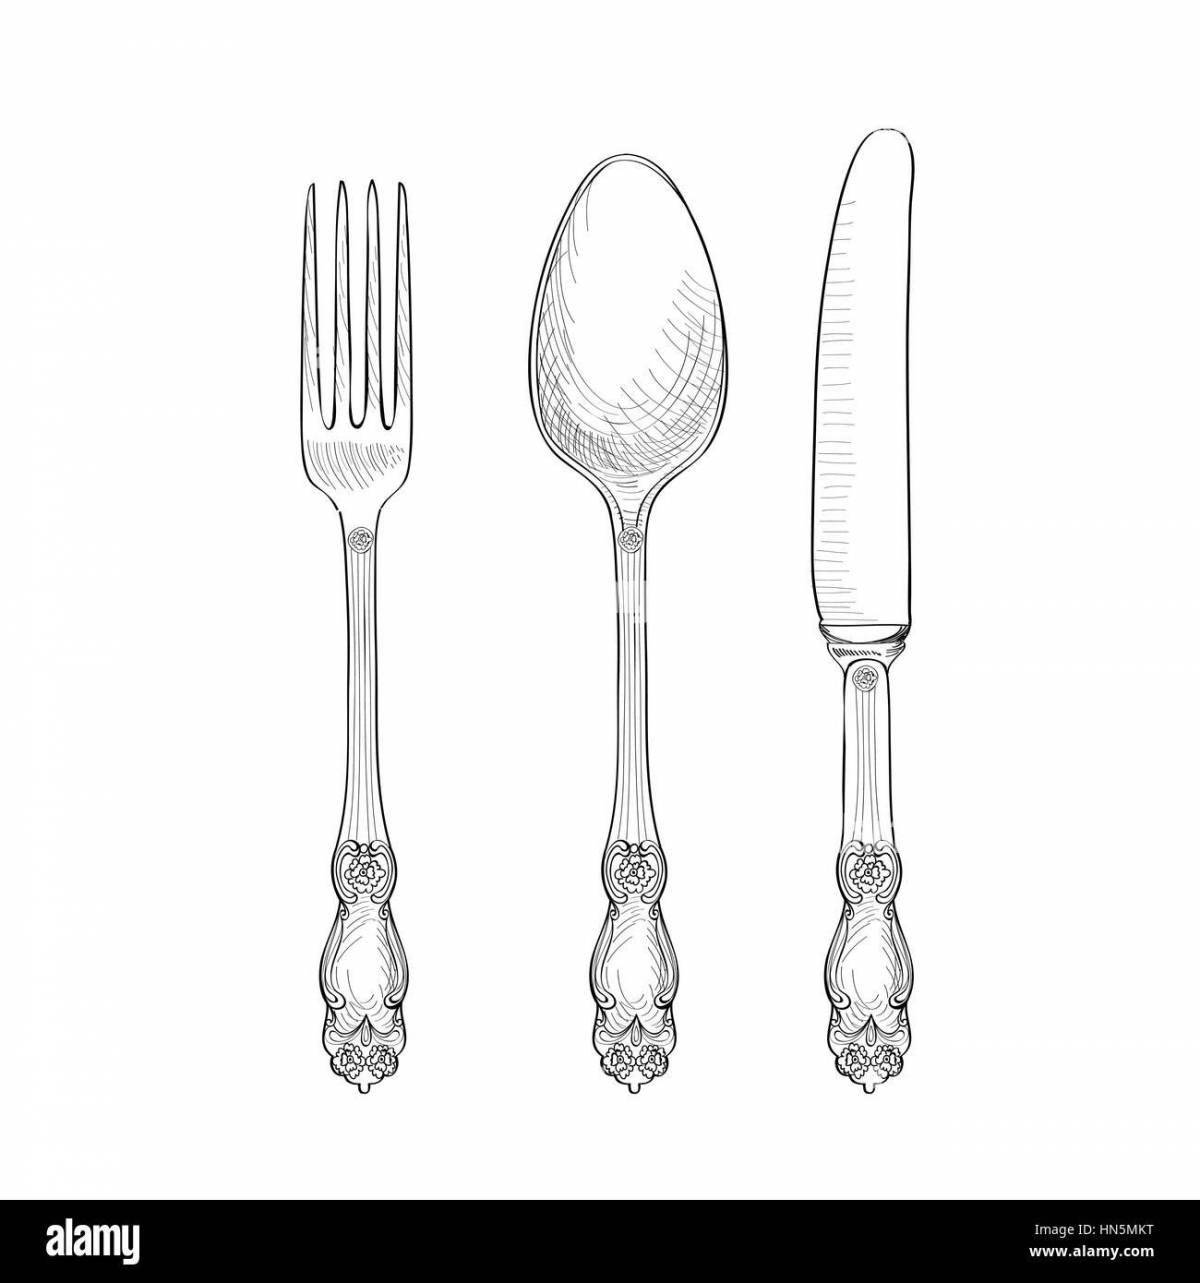 Animated cutlery coloring page for kids